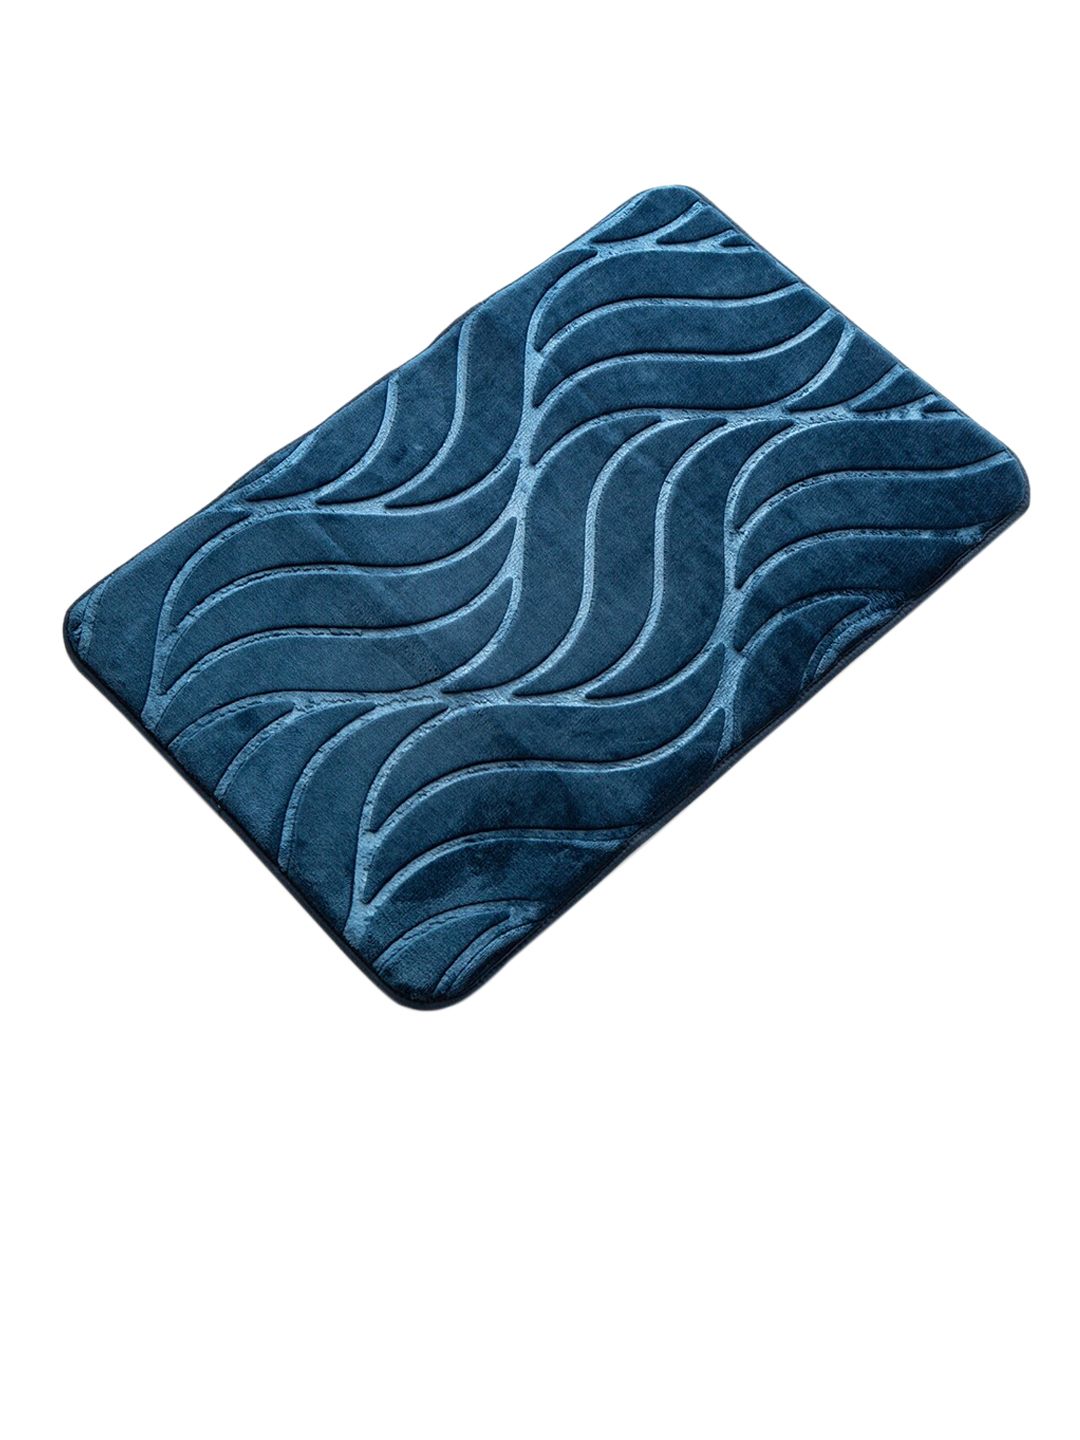 Home Centre Teal Blue Embossed Bath Mat Price in India